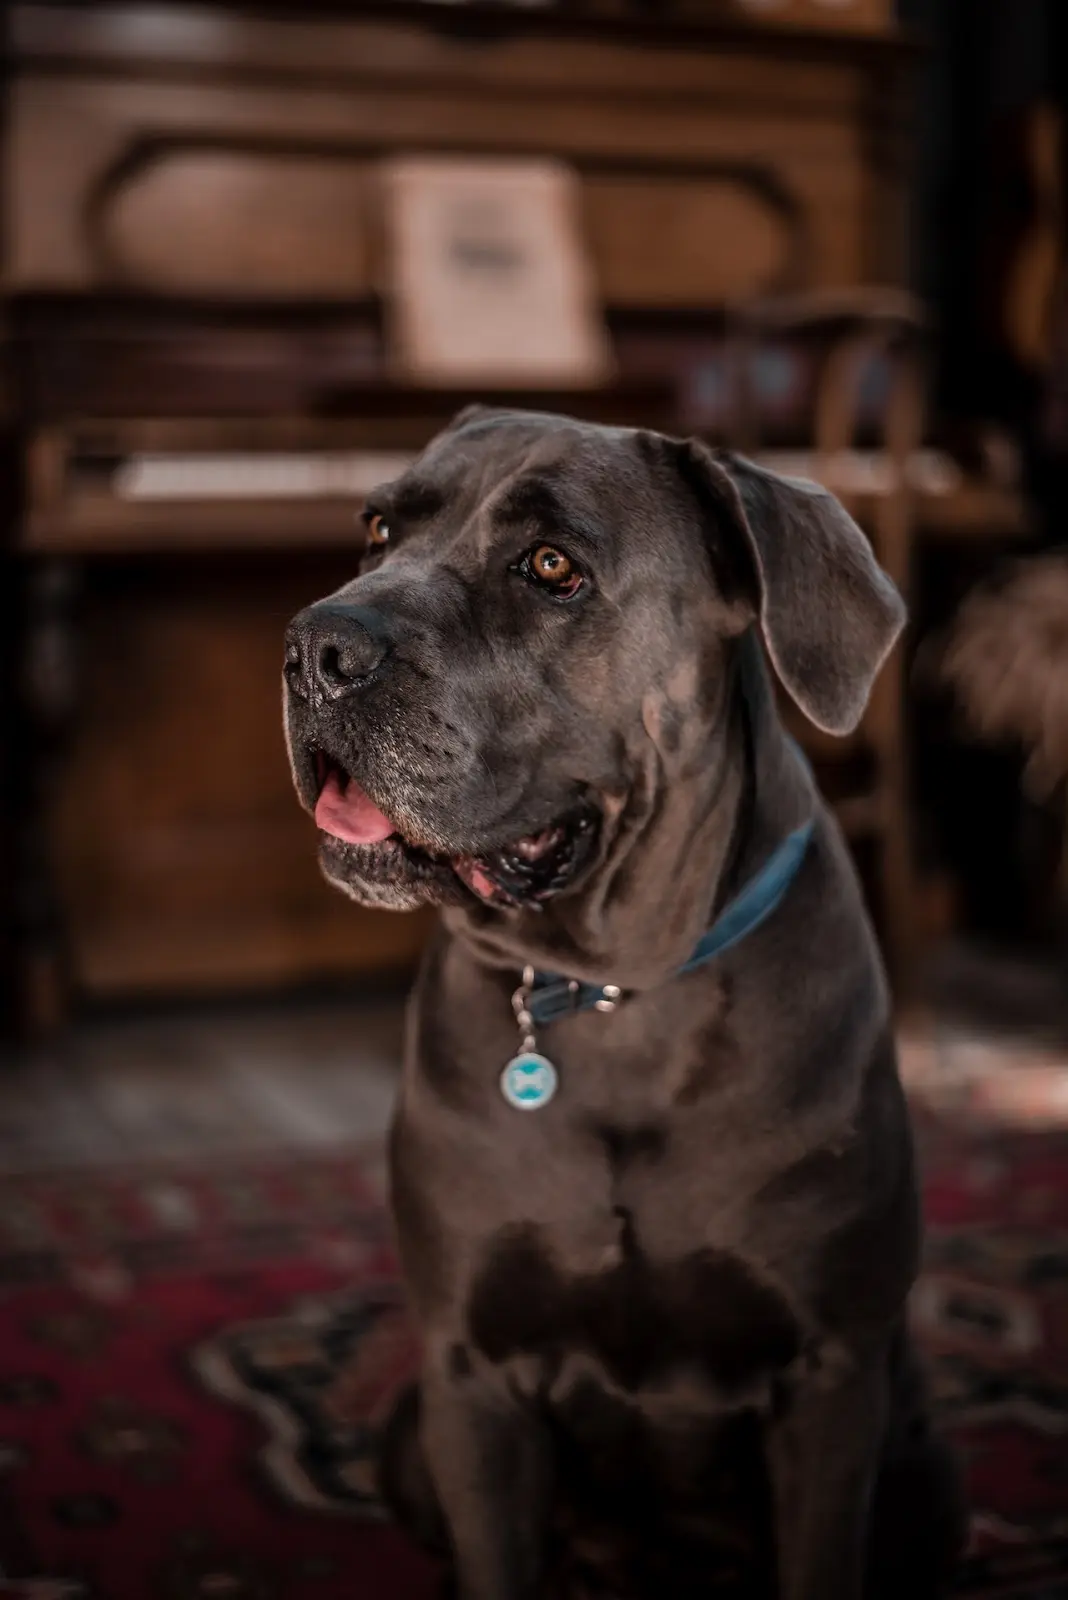 Managing a Cane Corso's bite force